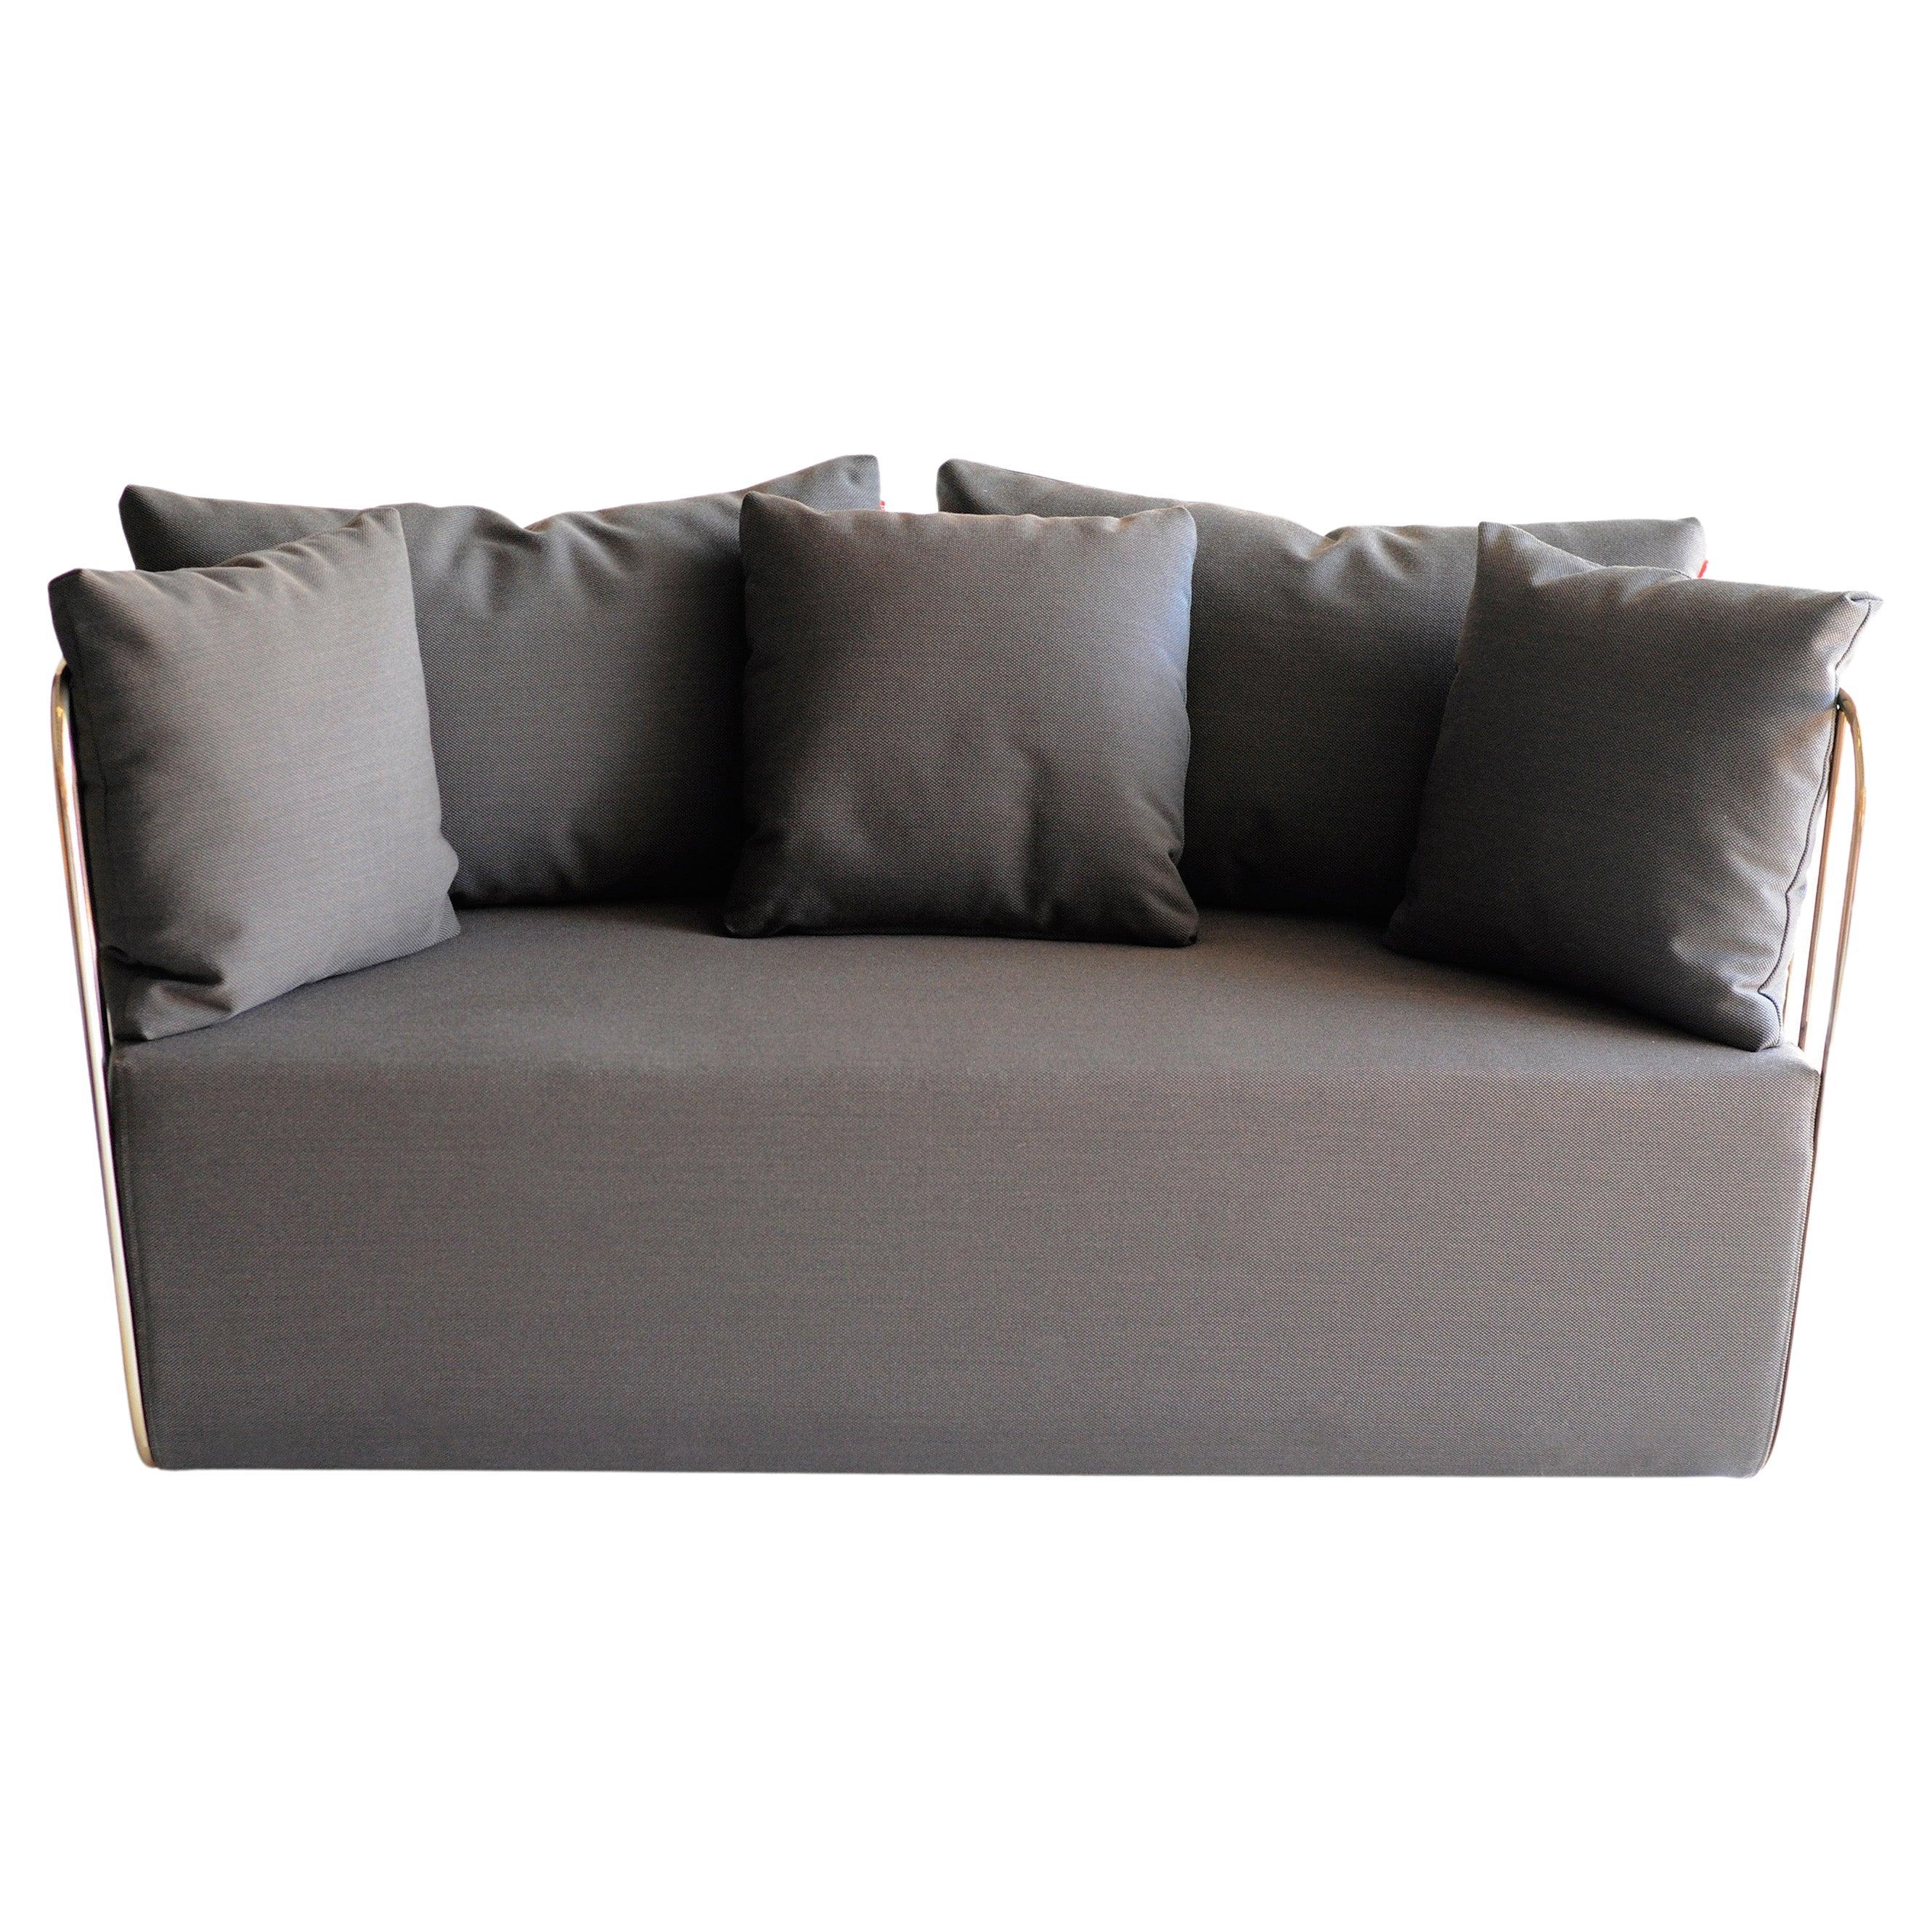 Bride’s Veil Love Seat by Phase Design For Sale